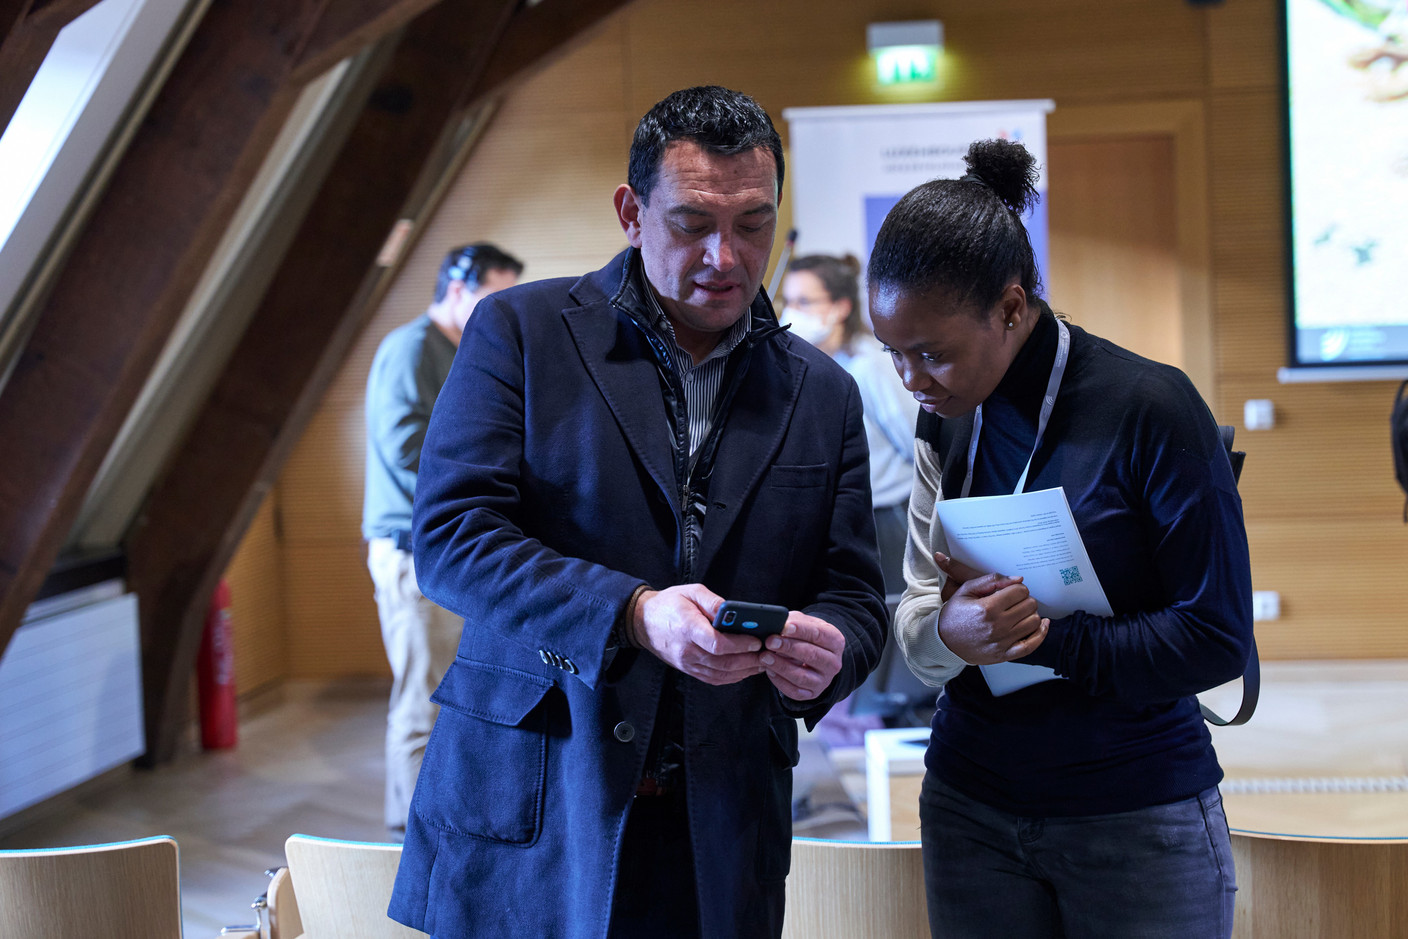 Photos from the first day of the event showing attendees/speakers at the 2022 European Microfinance Week e-MFP